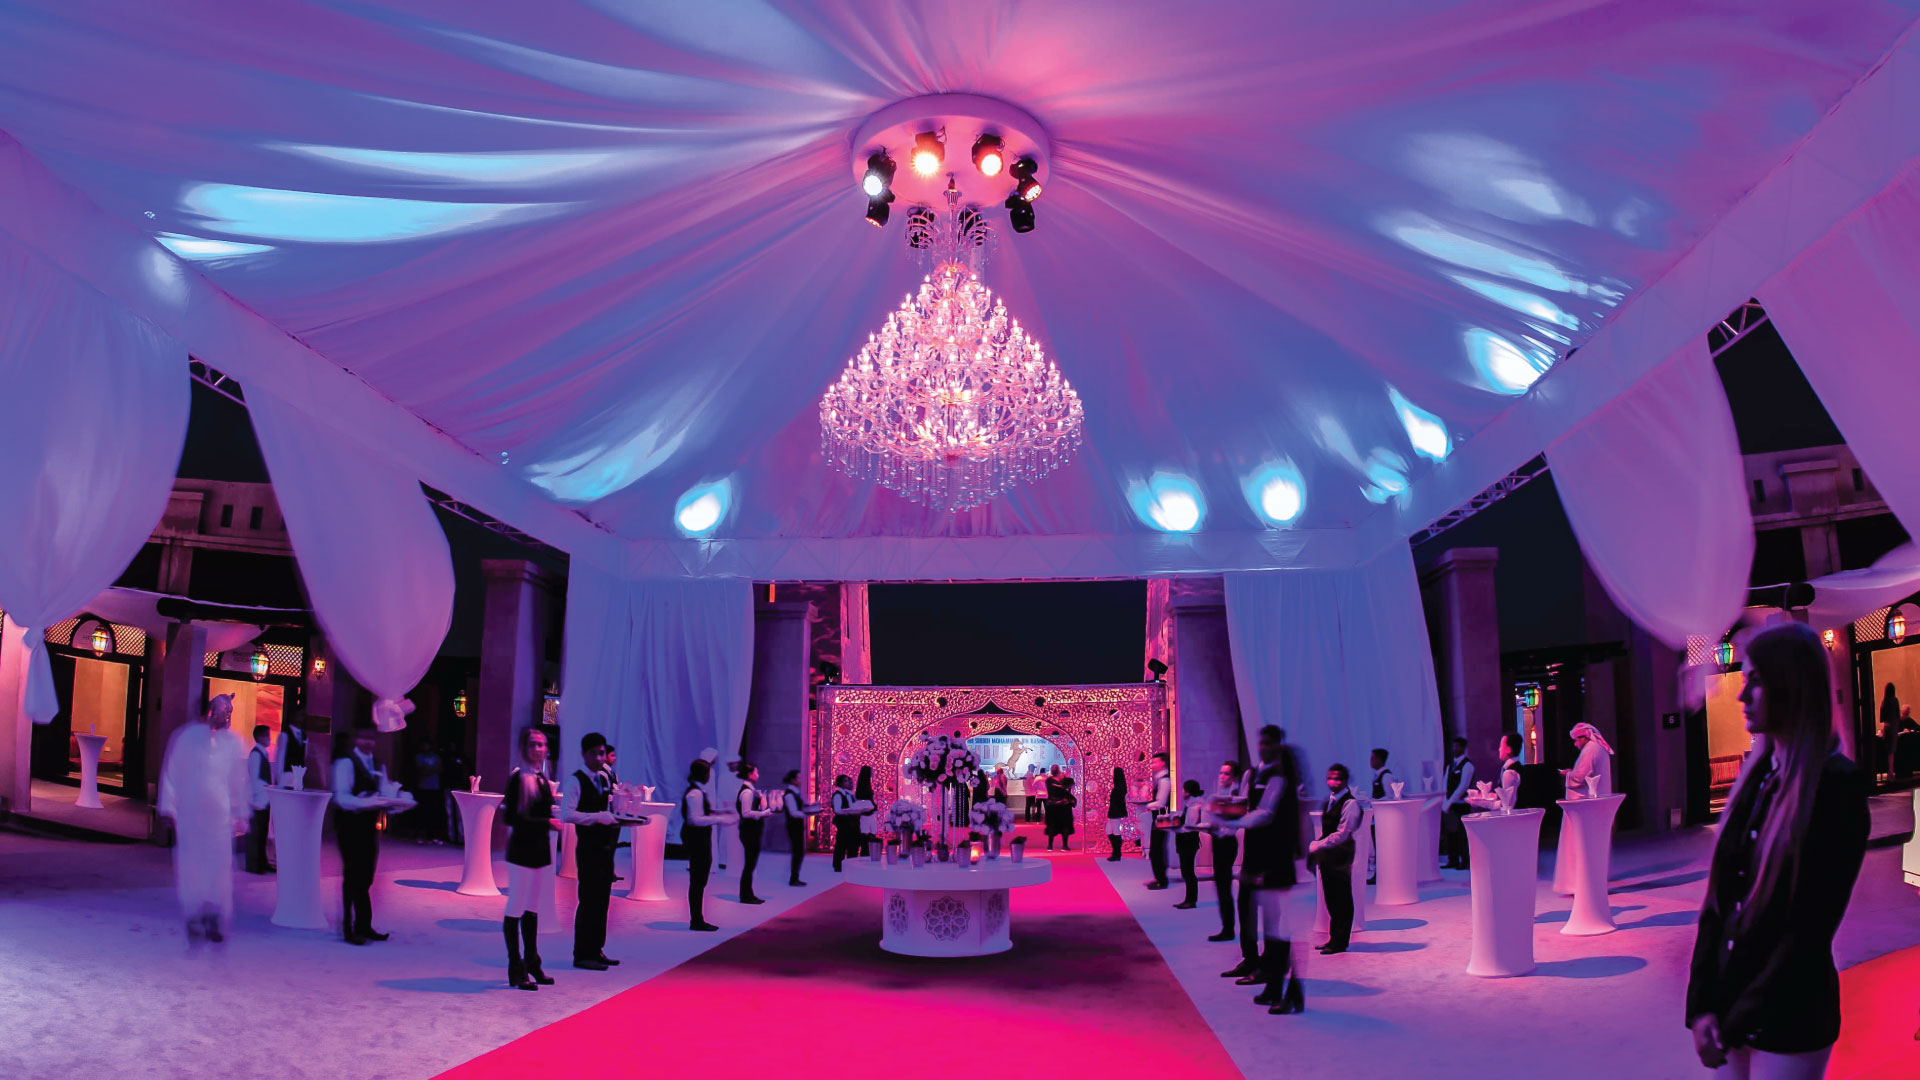 Event management companies – How to start one